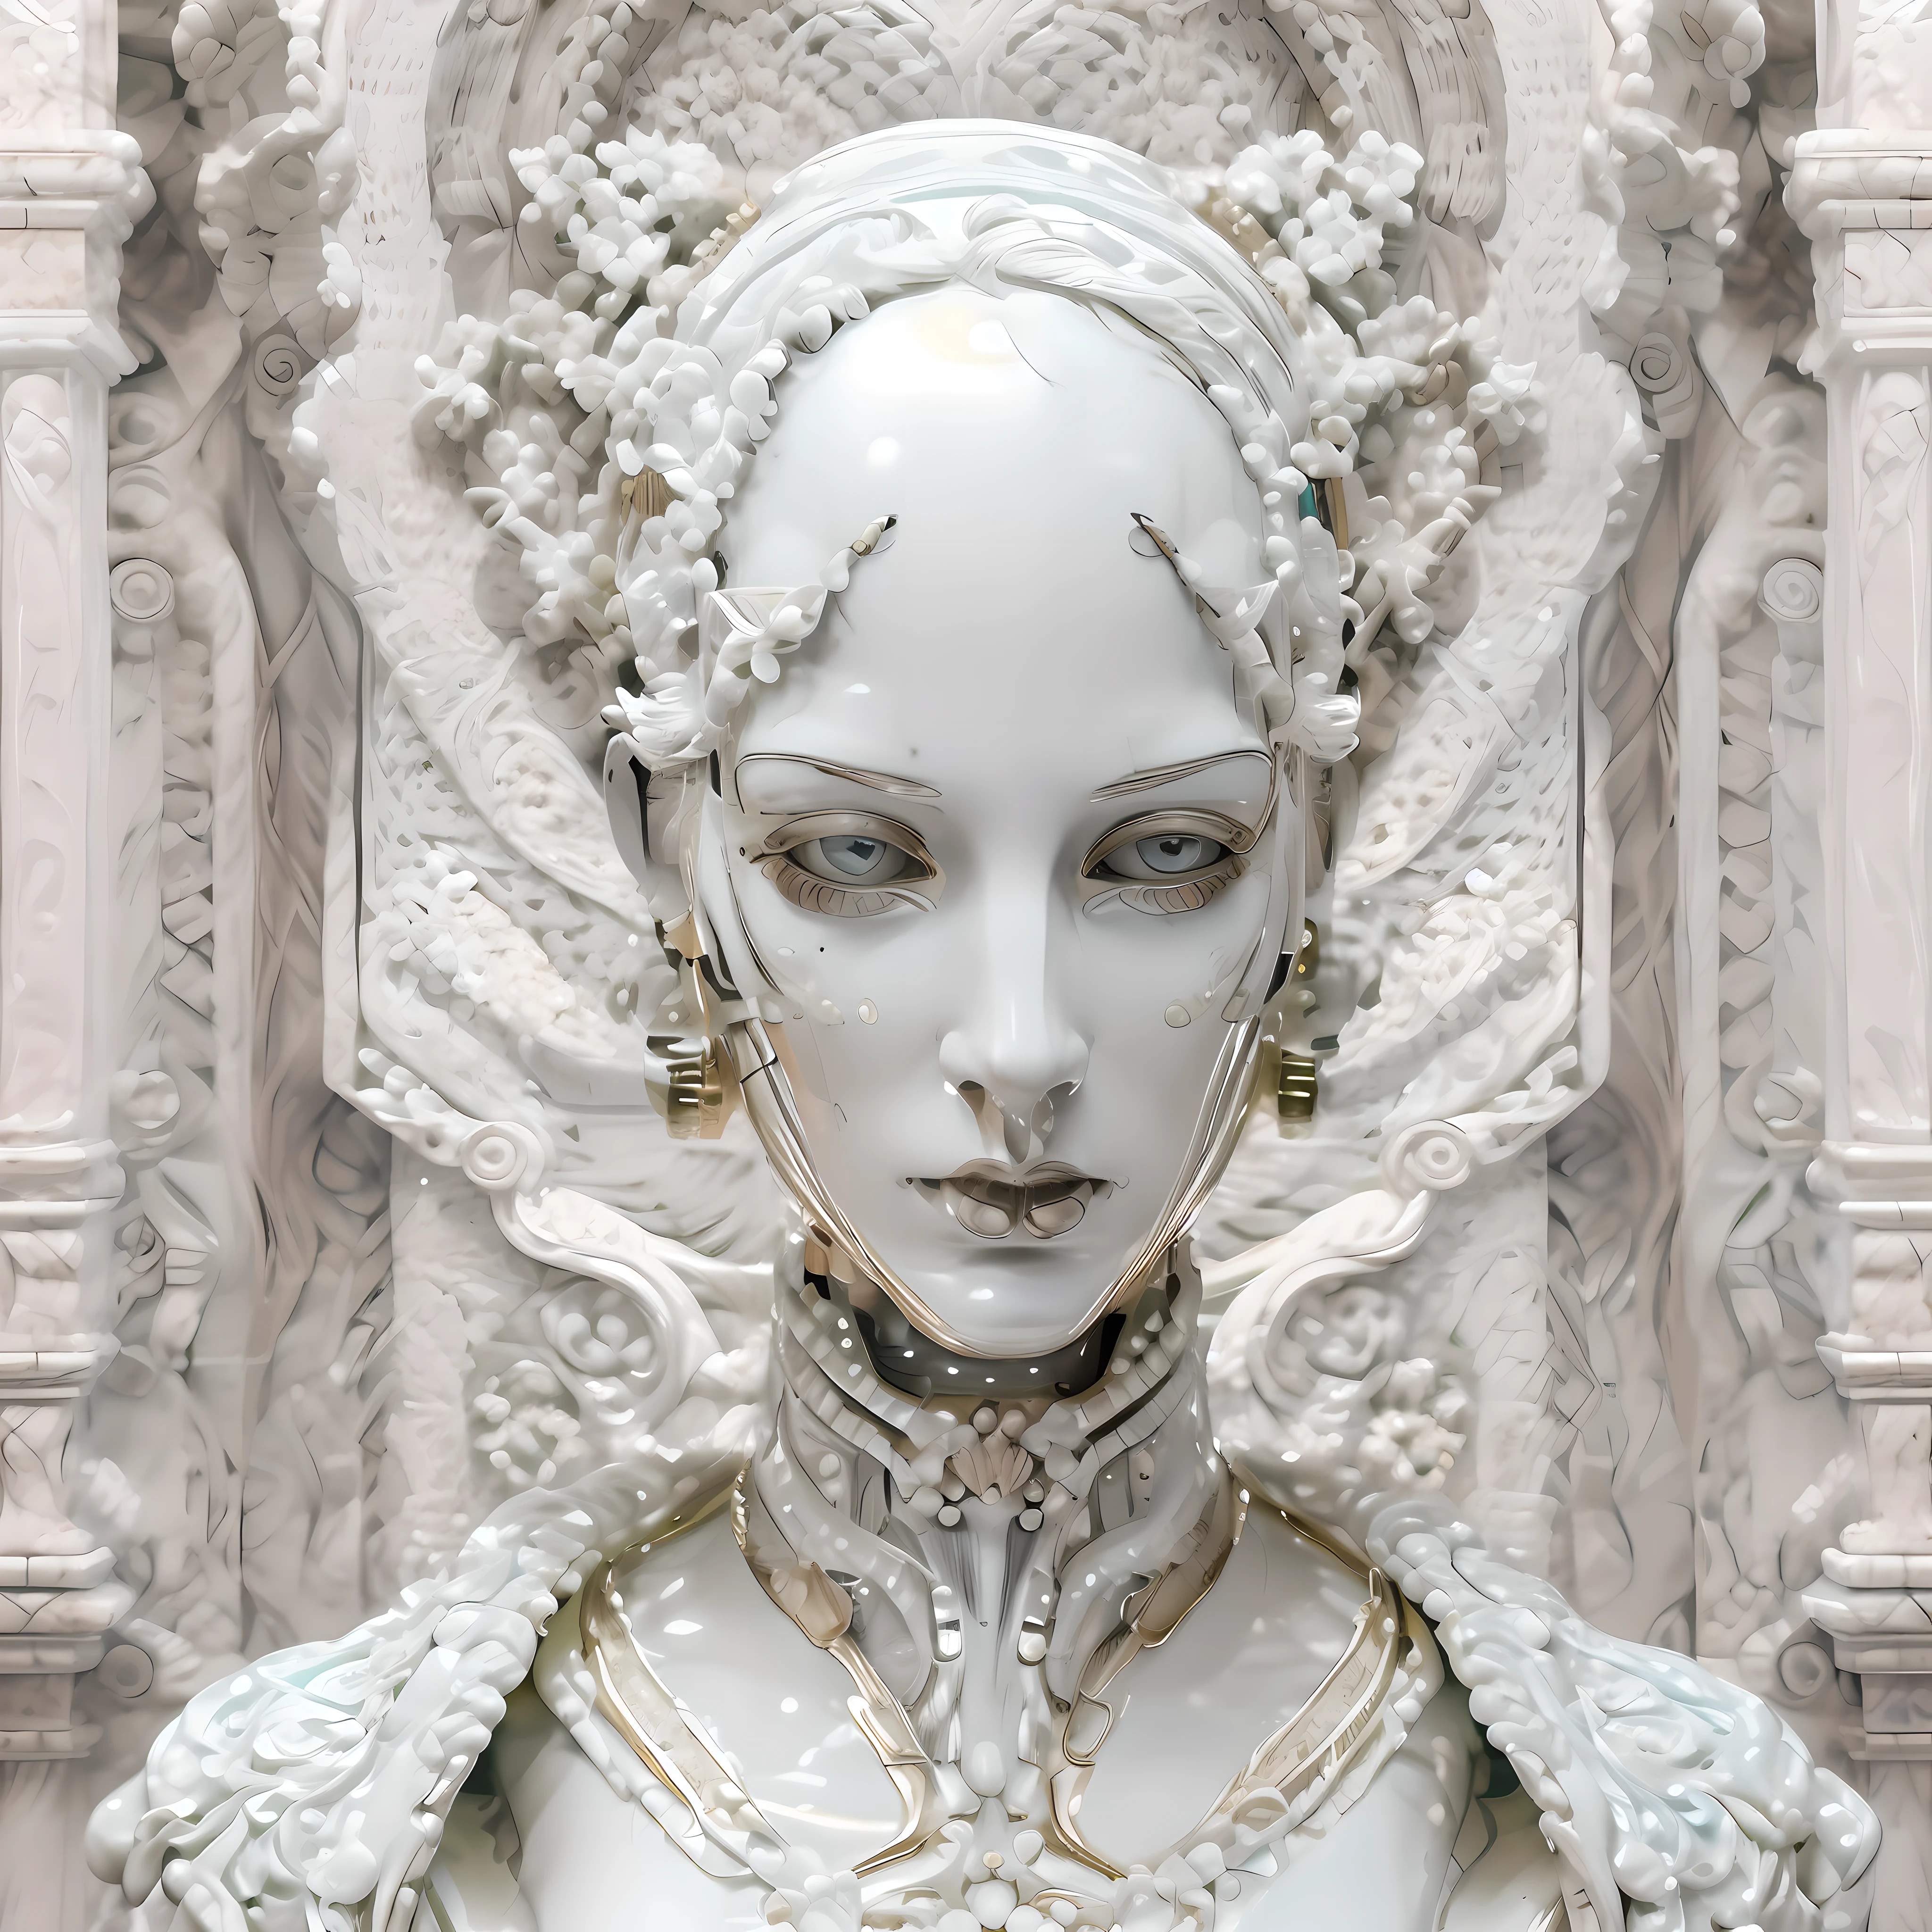 (((beautiful))) symmetrical female android, with strong androgynous facial features, face made and sculpted in fine porcelain with white marble, baroque aesthetics and art deco clothing.